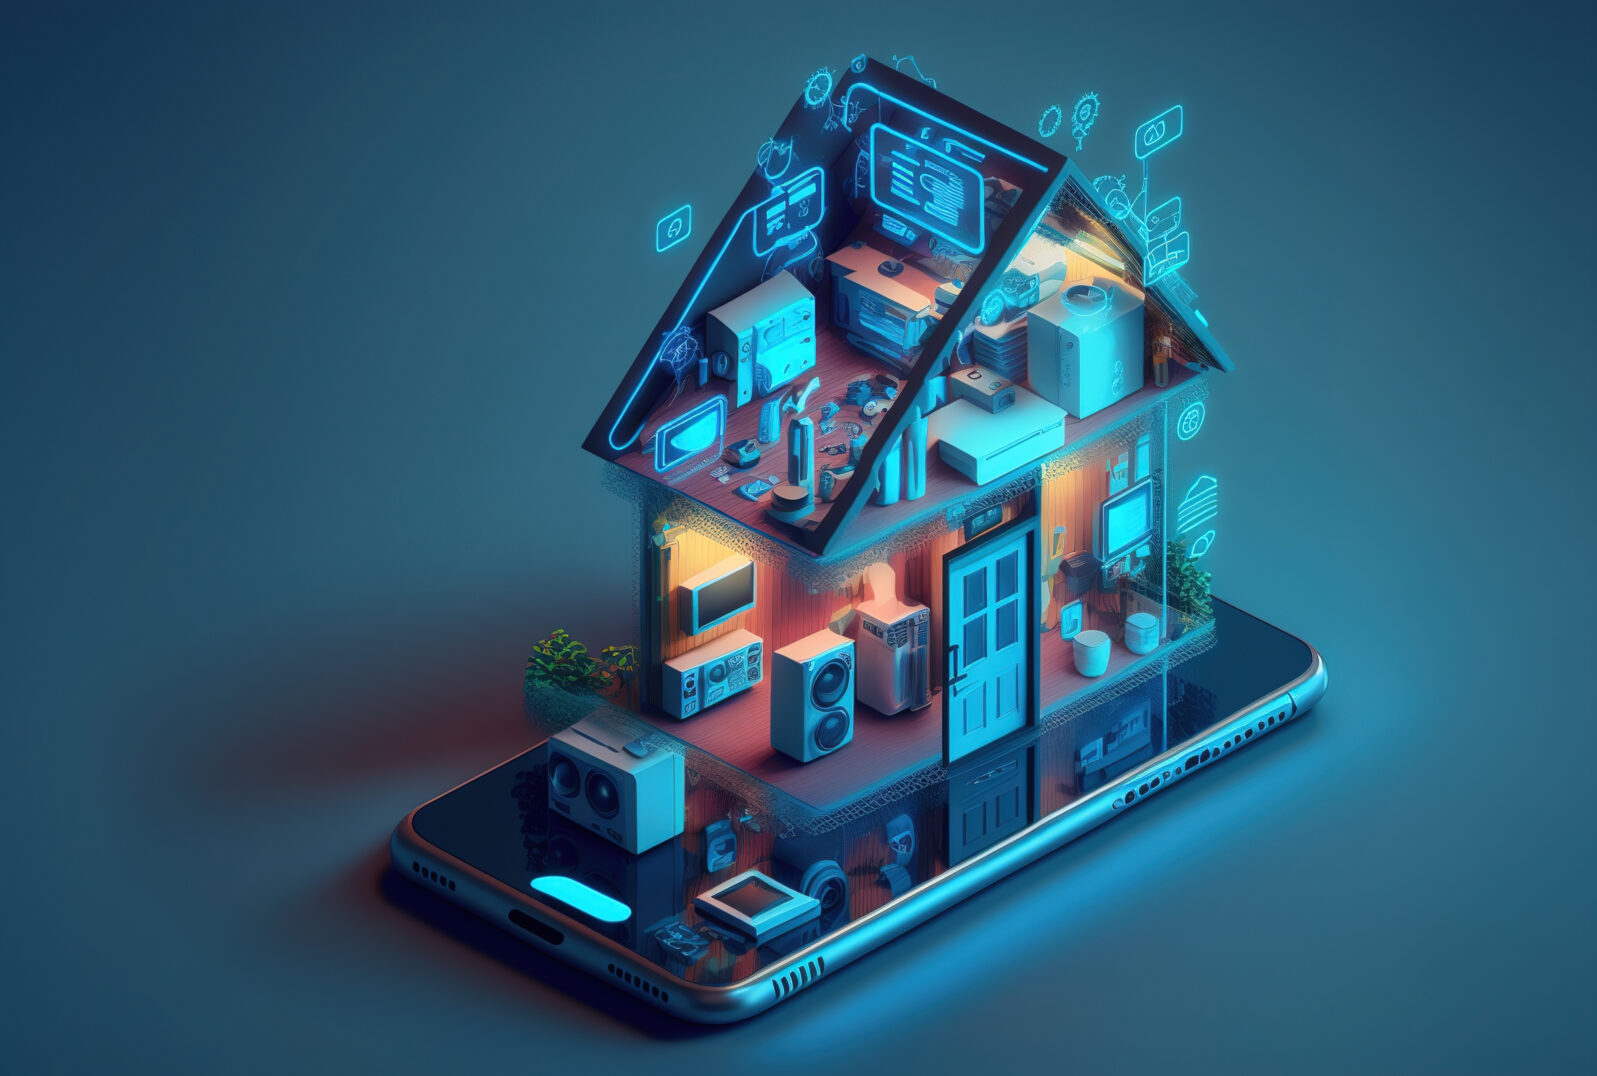 Smartphone screen with smart home technologies on a blue backdrop. Internet of things isometric conceptual image. Digital Residence utilizing a mobile phone's fingerprint to get access to IOT systems